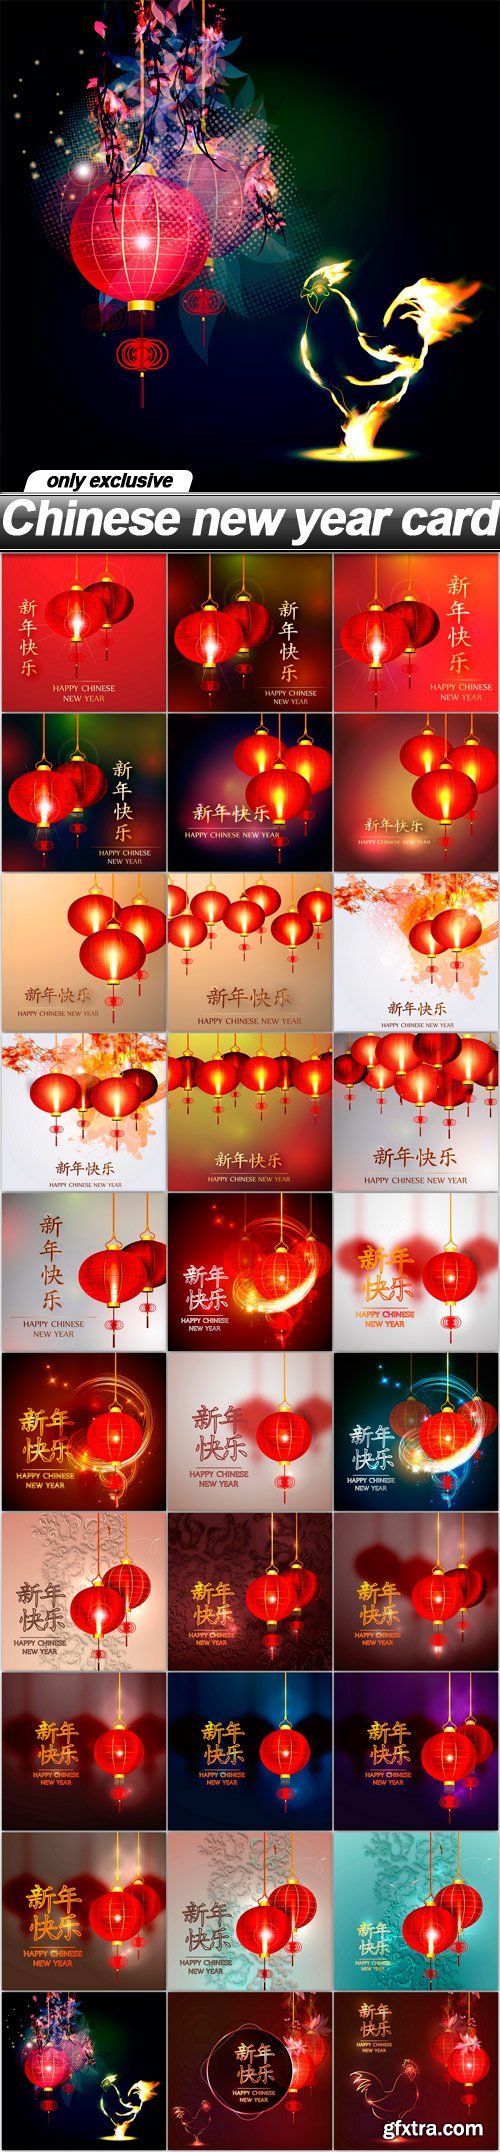 Chinese new year card - 30 EPS